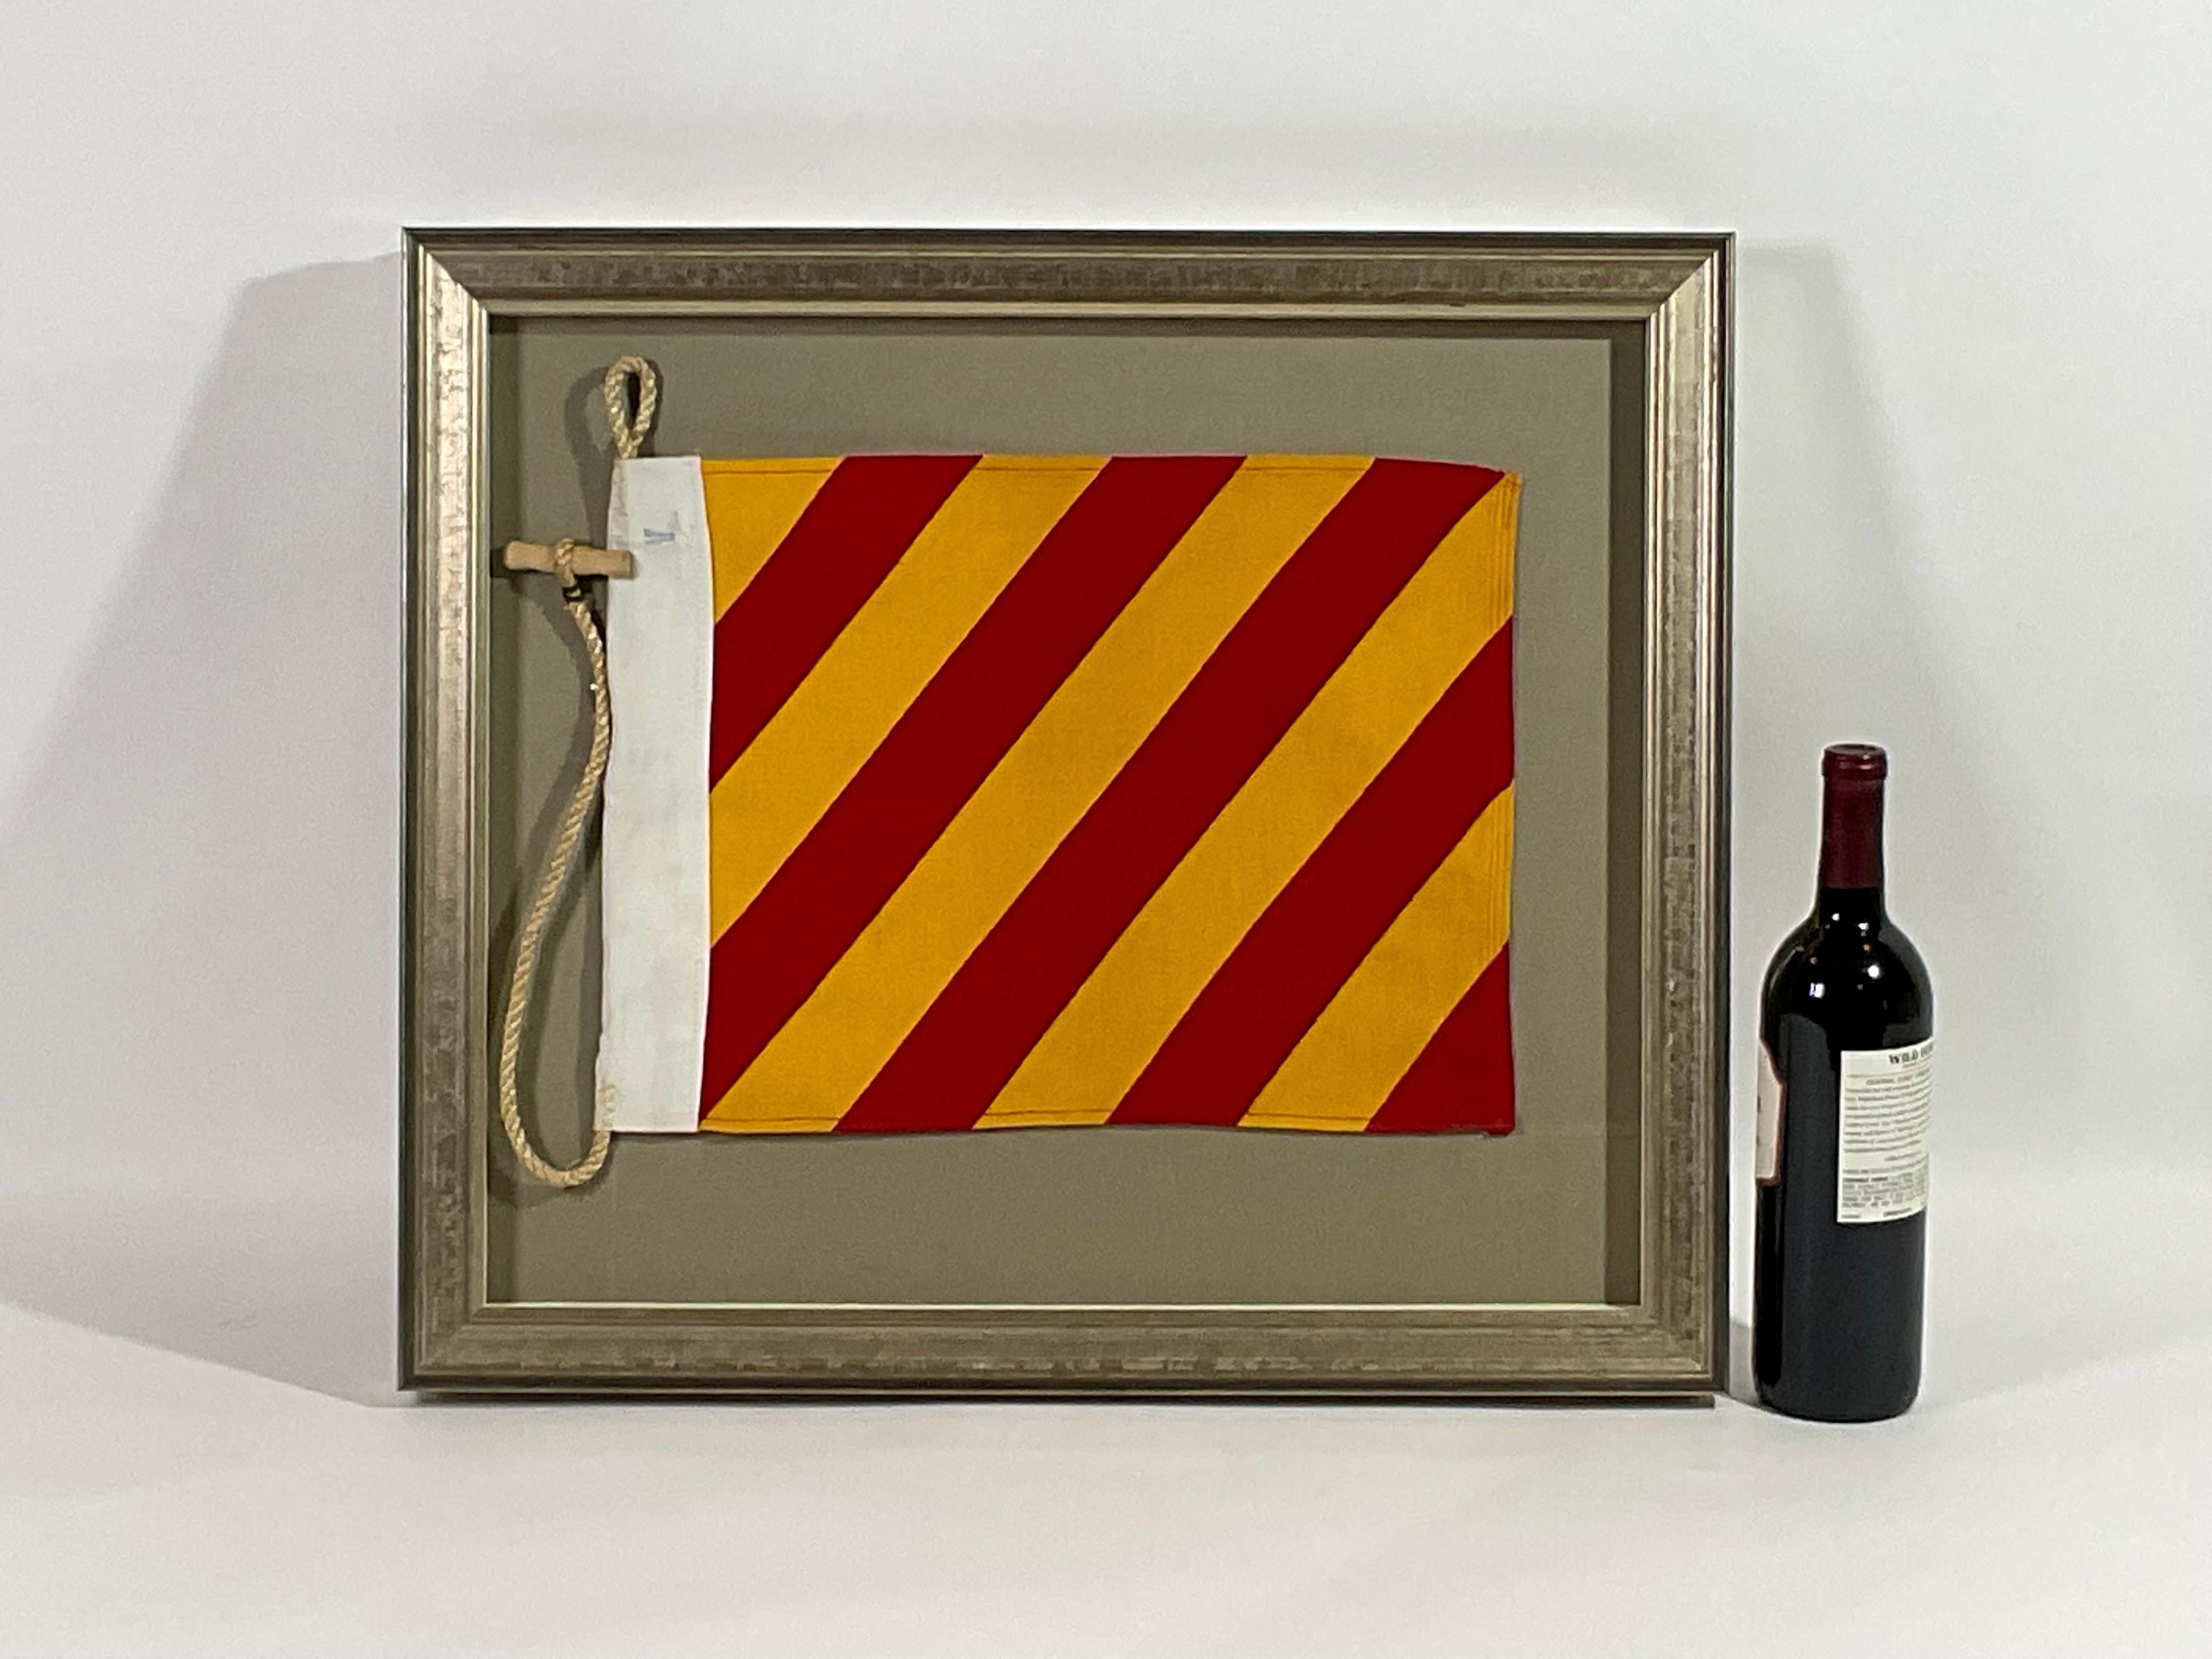 Framed maritime signal flag representing the letter “Y” code name YANKEE in the international code of signals. This authentic pennant red and yellow cotton is fitted to a heavy canvas hoist band with original rope and toggle. This nautical relic is